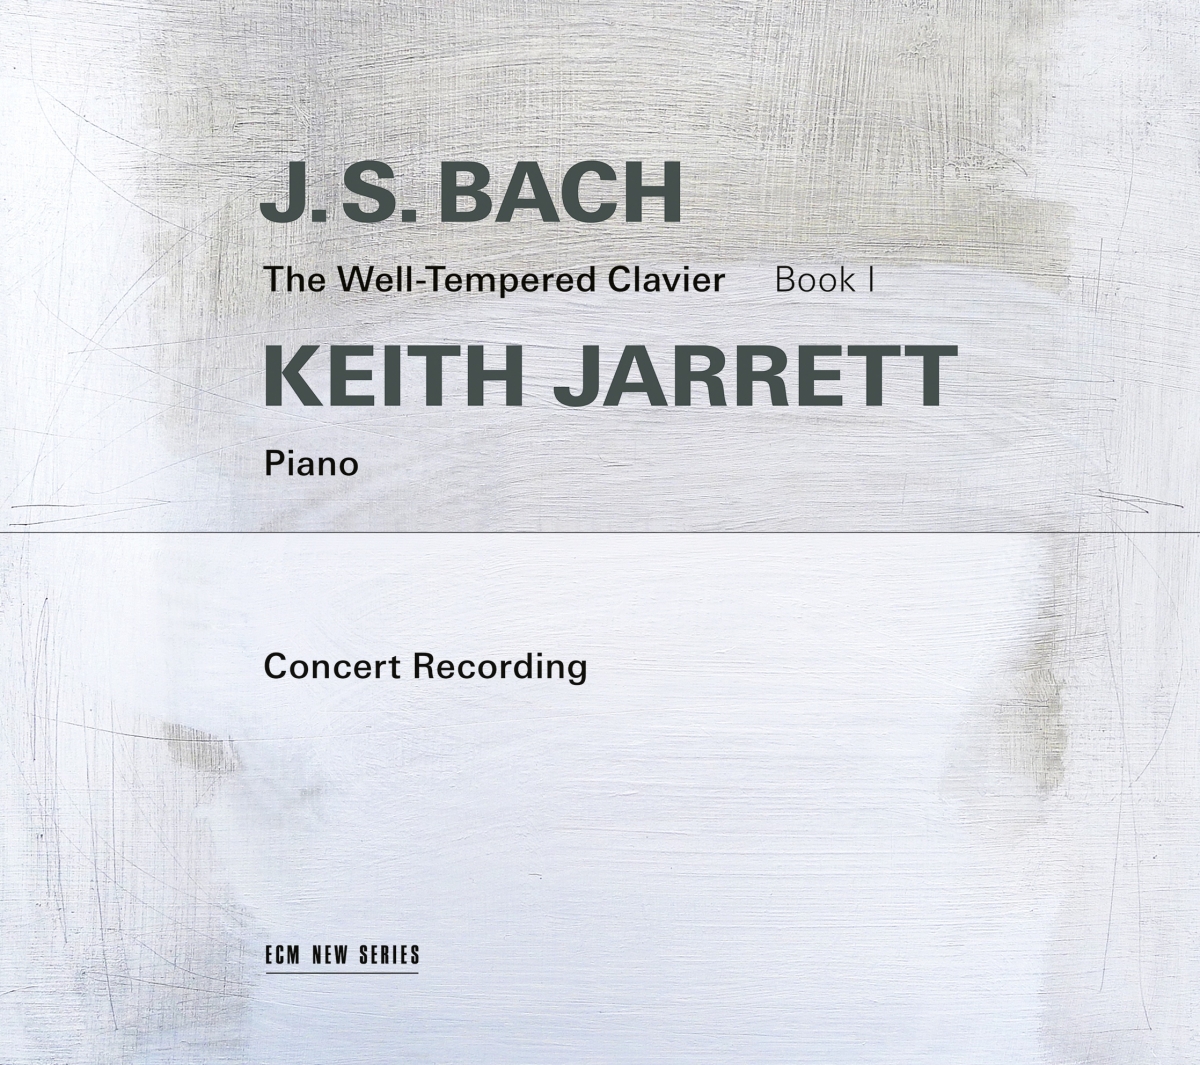 Keith Jarrett: The Well-Tempered Clavier Book I